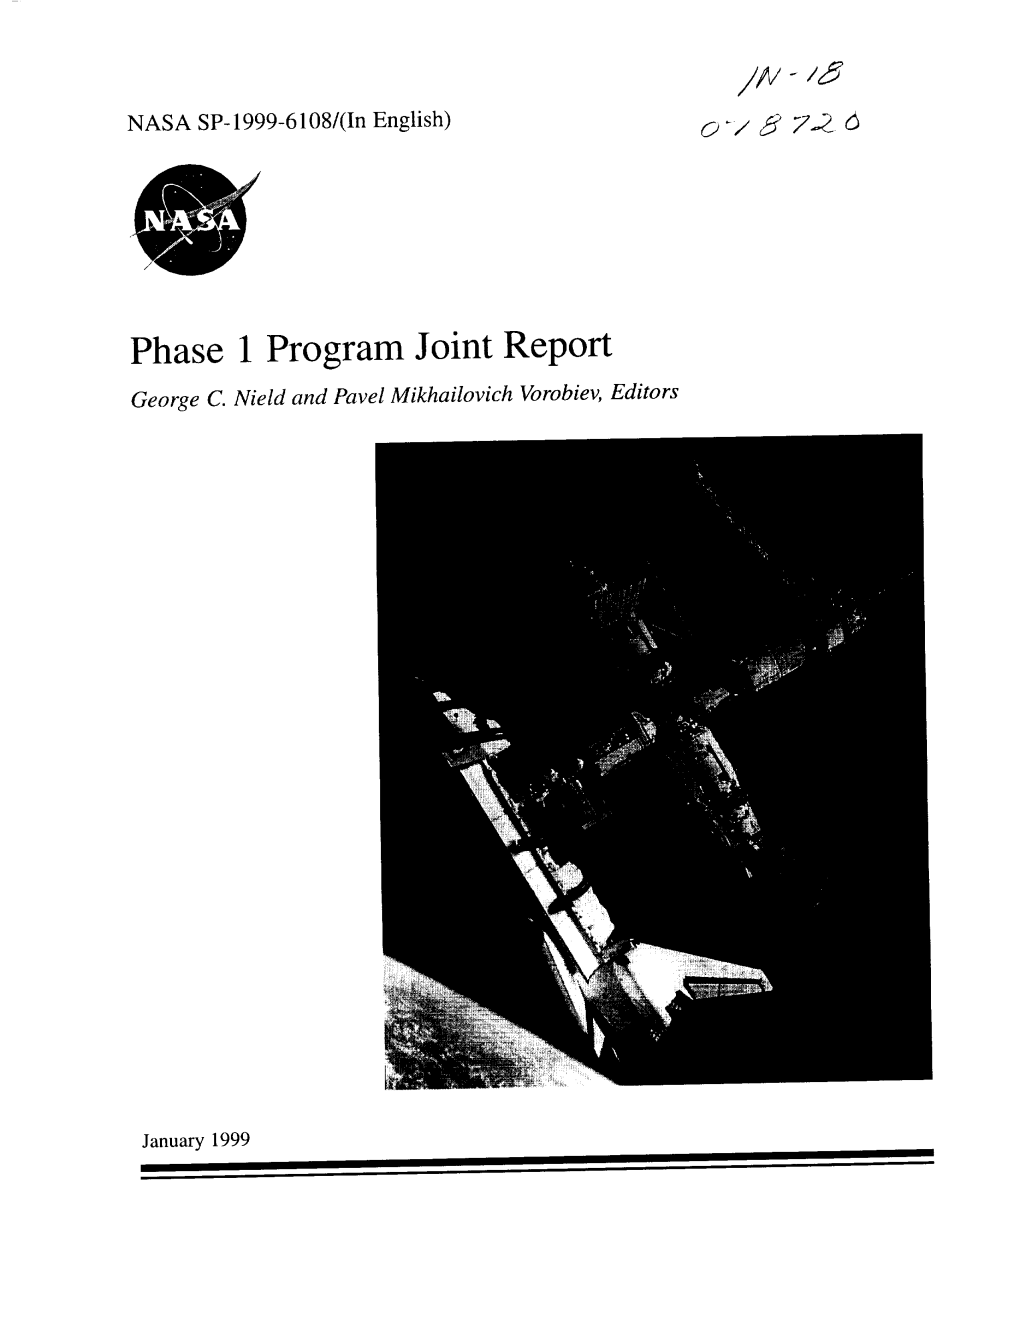 Phase 1 Program Joint Report